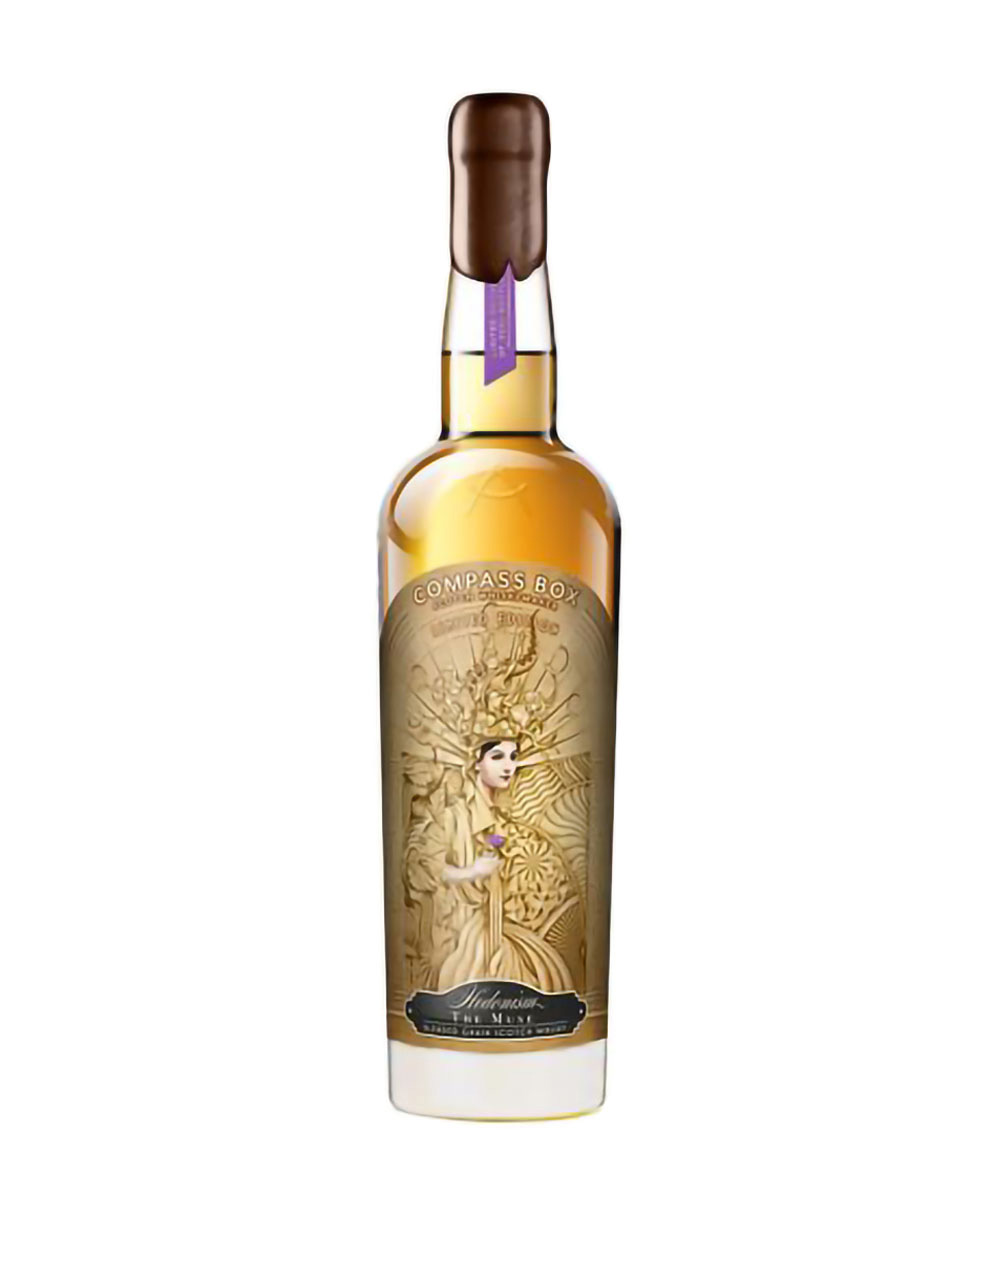 Compass Box Hedonism The Muse Limited Edition Scotch Whisky